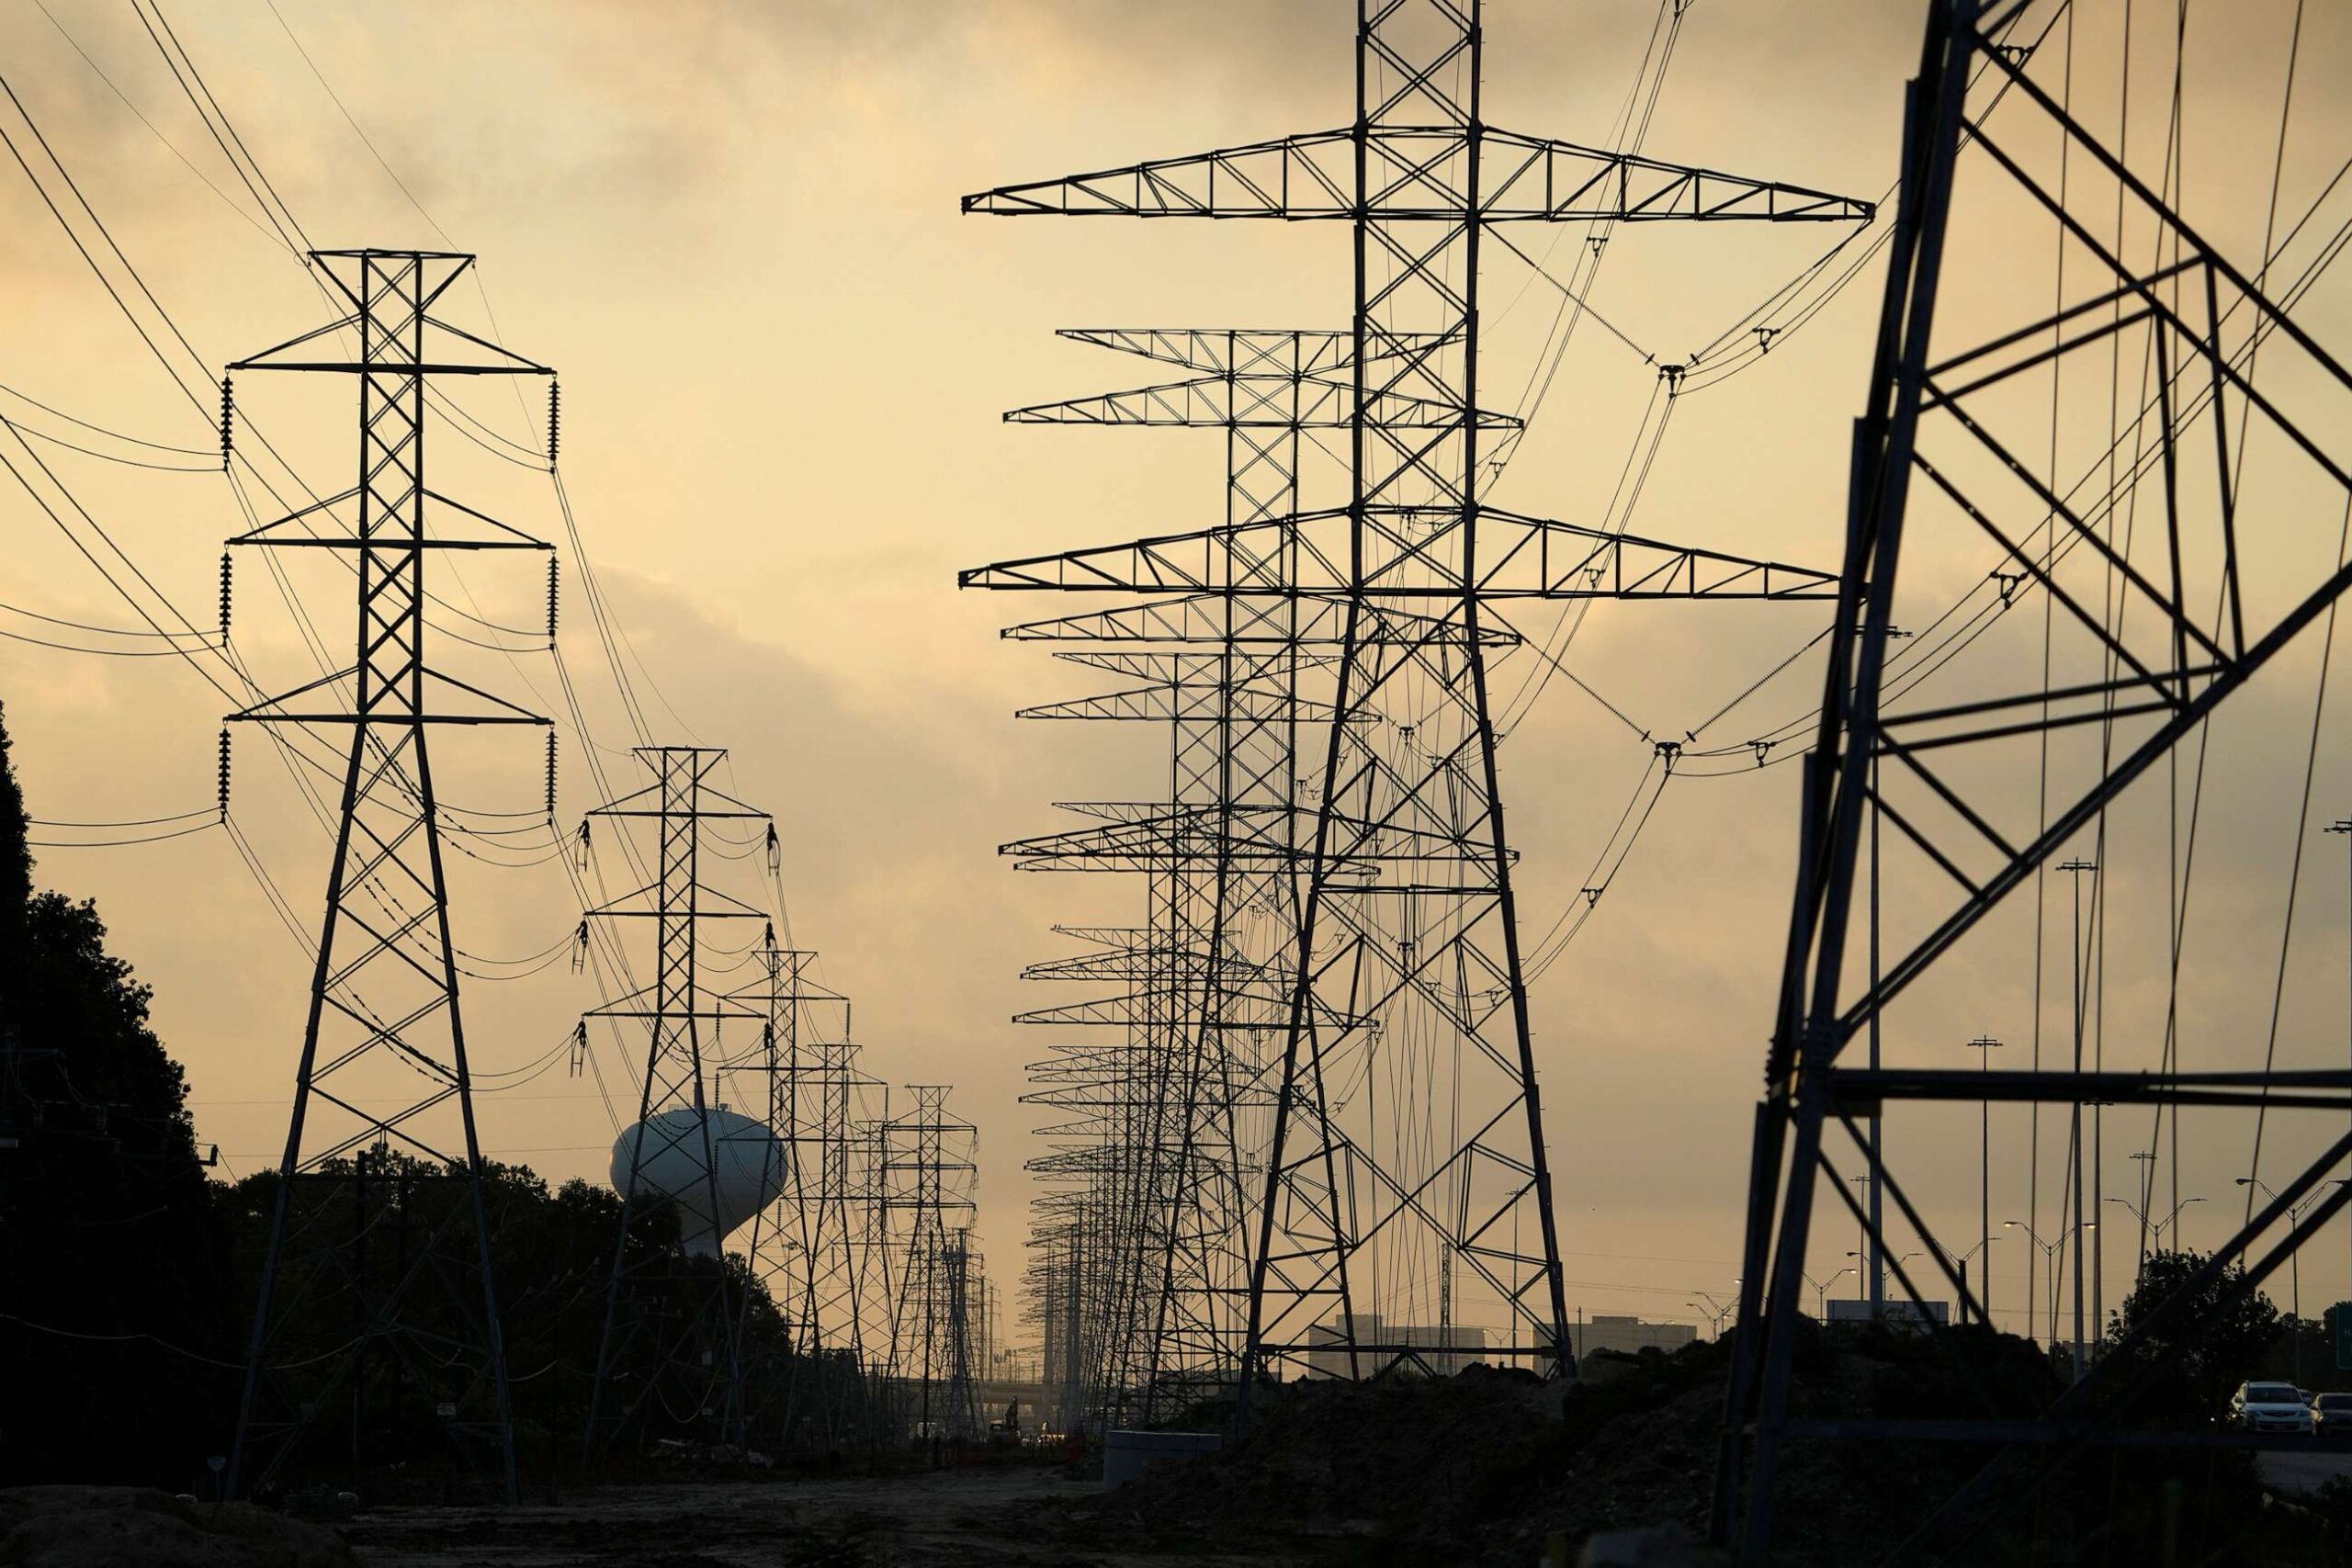 Texas Faces Intense Summer Heat: How ERCOT Plans to Keep Lights On Amid Rising Temperatures